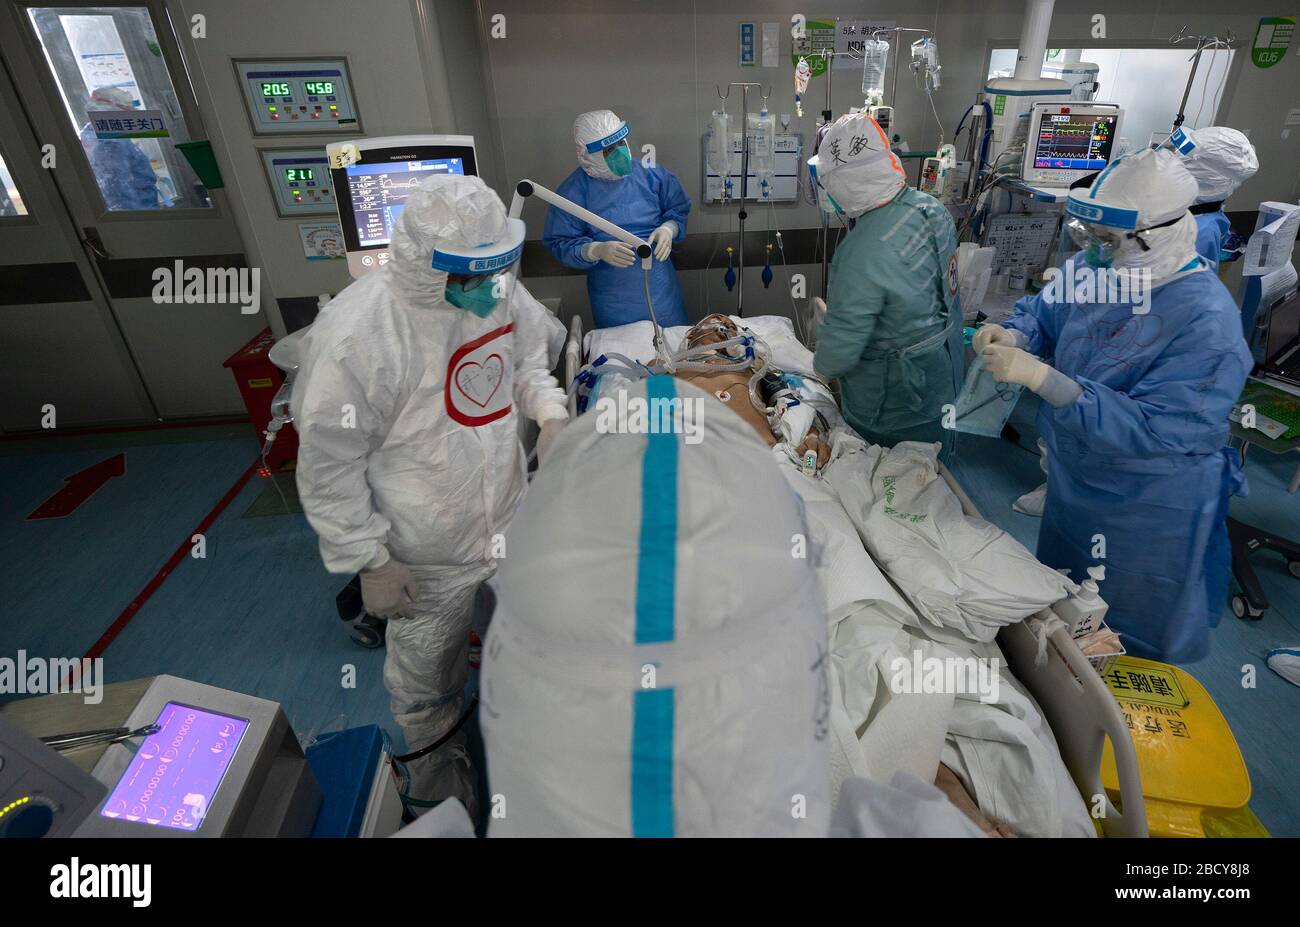 Wuhan, China's Hubei Province. 5th Apr, 2020. Medical staff prepare to take off the ECMO machine used to support senior Hu's lungs at the Wuhan pulmonary hospital in Wuhan, capital of central China's Hubei Province, April 5, 2020. A patient surnamed Hu, a 40-year-old severe case of the COVID-19 who was diagnosed with the disease in early February, has the functions of his lungs recovered on Sunday at the Wuhan pulmonary hospital with days of extracorporeal membrane oxygenation (ECMO) support. Credit: Fei Maohua/Xinhua/Alamy Live News Stock Photo